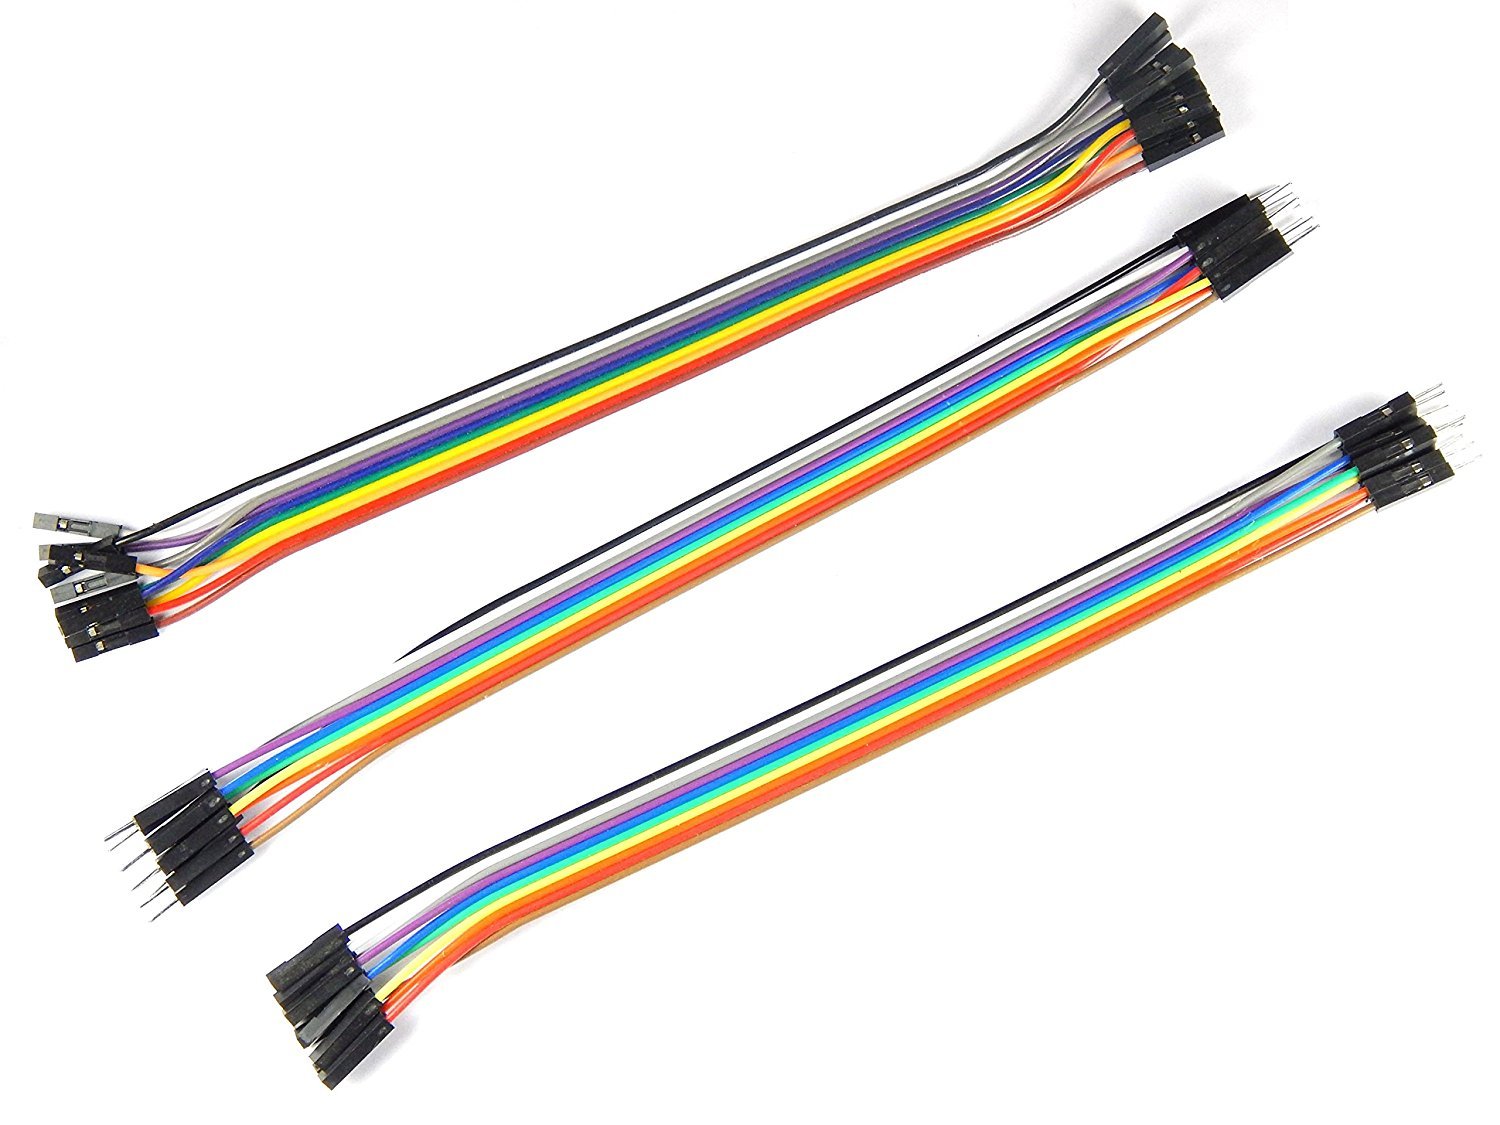 10X 6 inch 9 pin pins Female Male Arduino Jumper Cables Wires Sensor Shields 